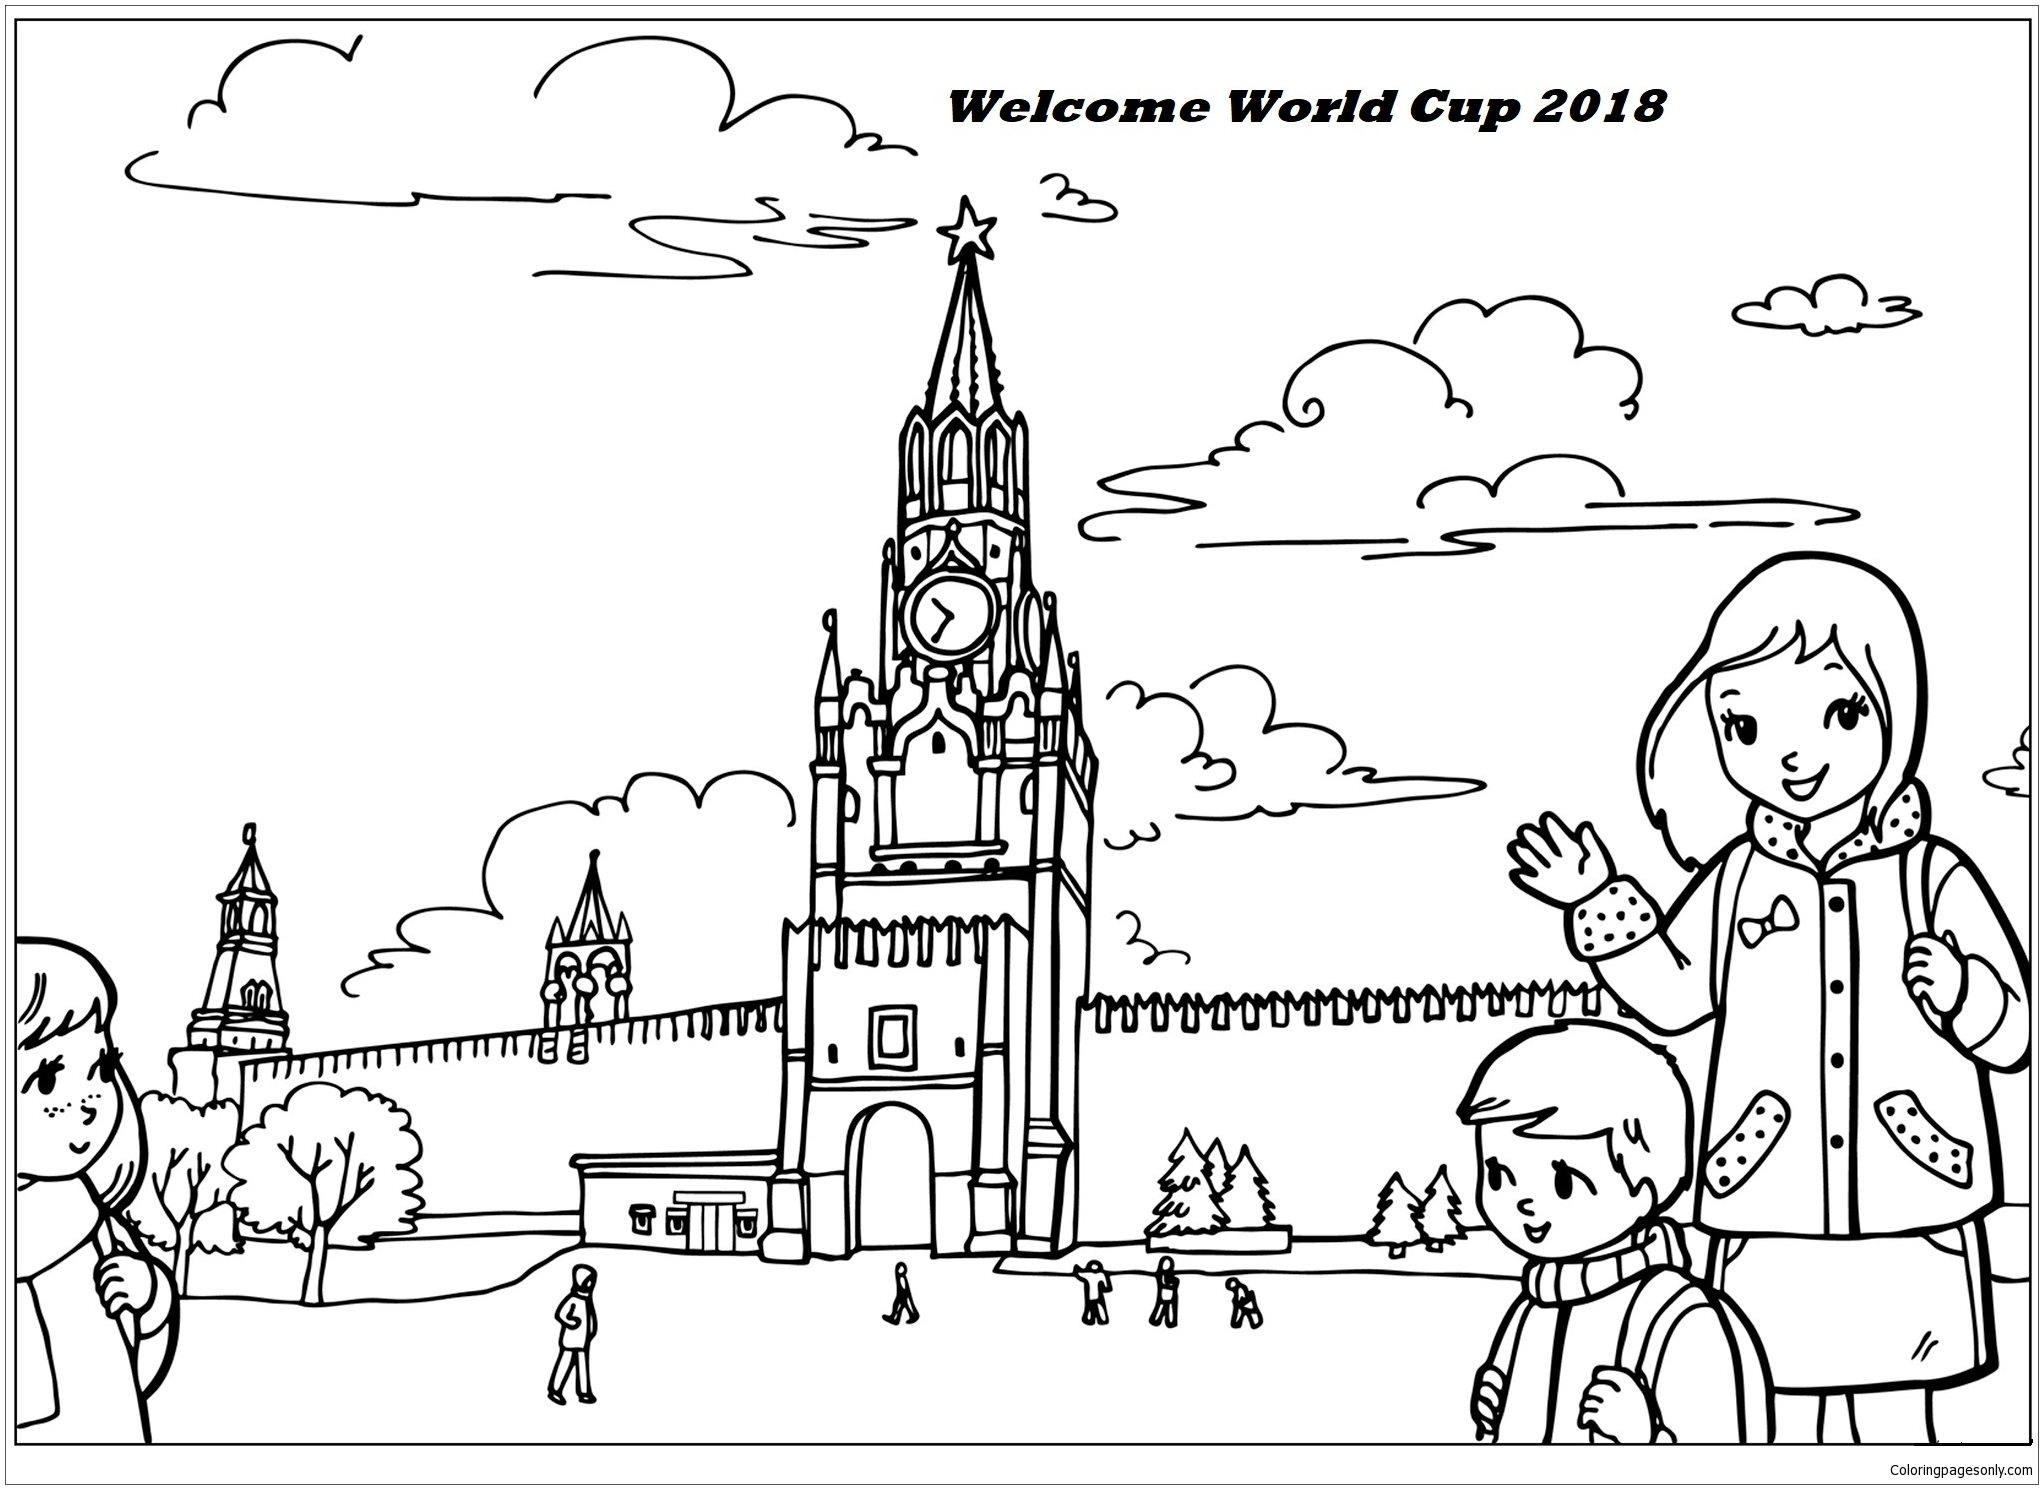 Welcome World Cup 2018 Coloring Pages